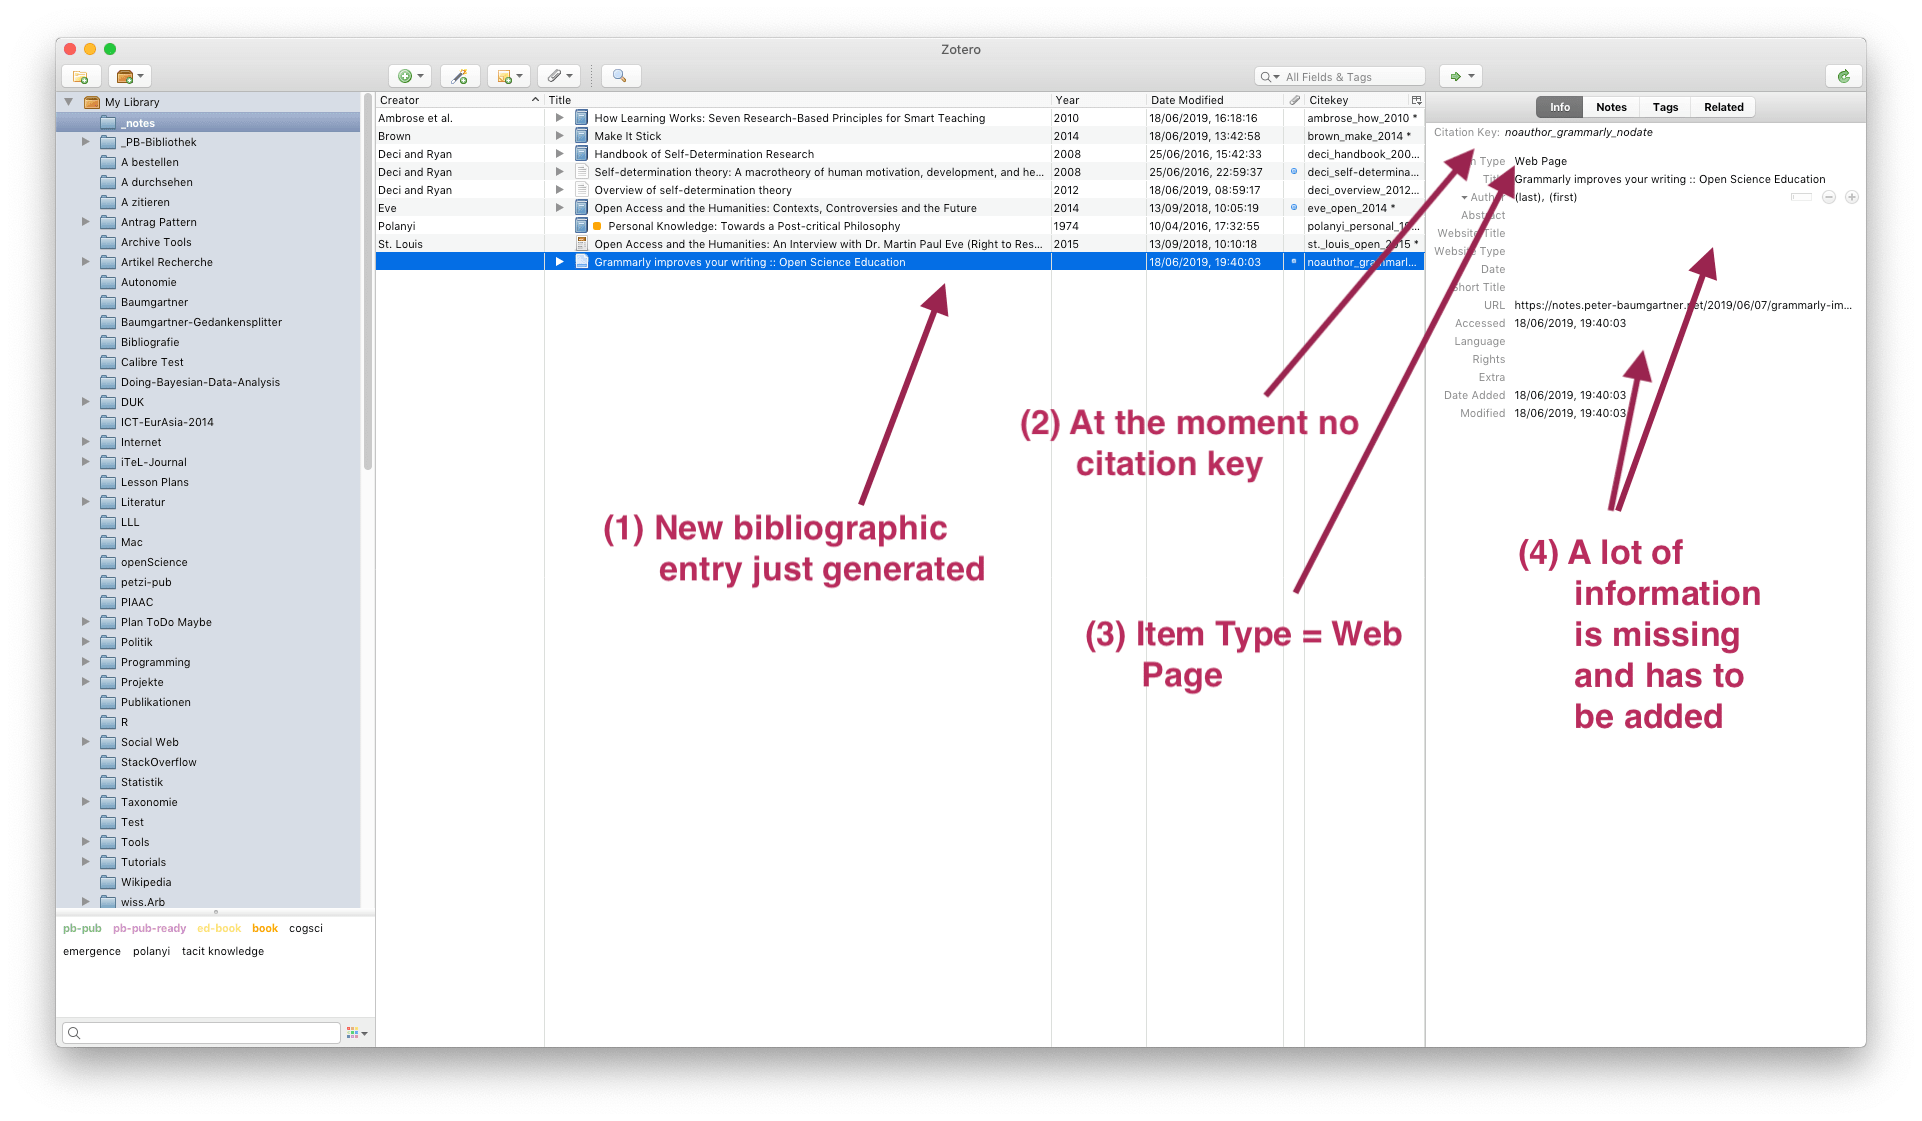 Sreenshot of the Zotero bilbiograpy with the new downloaed biobliographic entry.